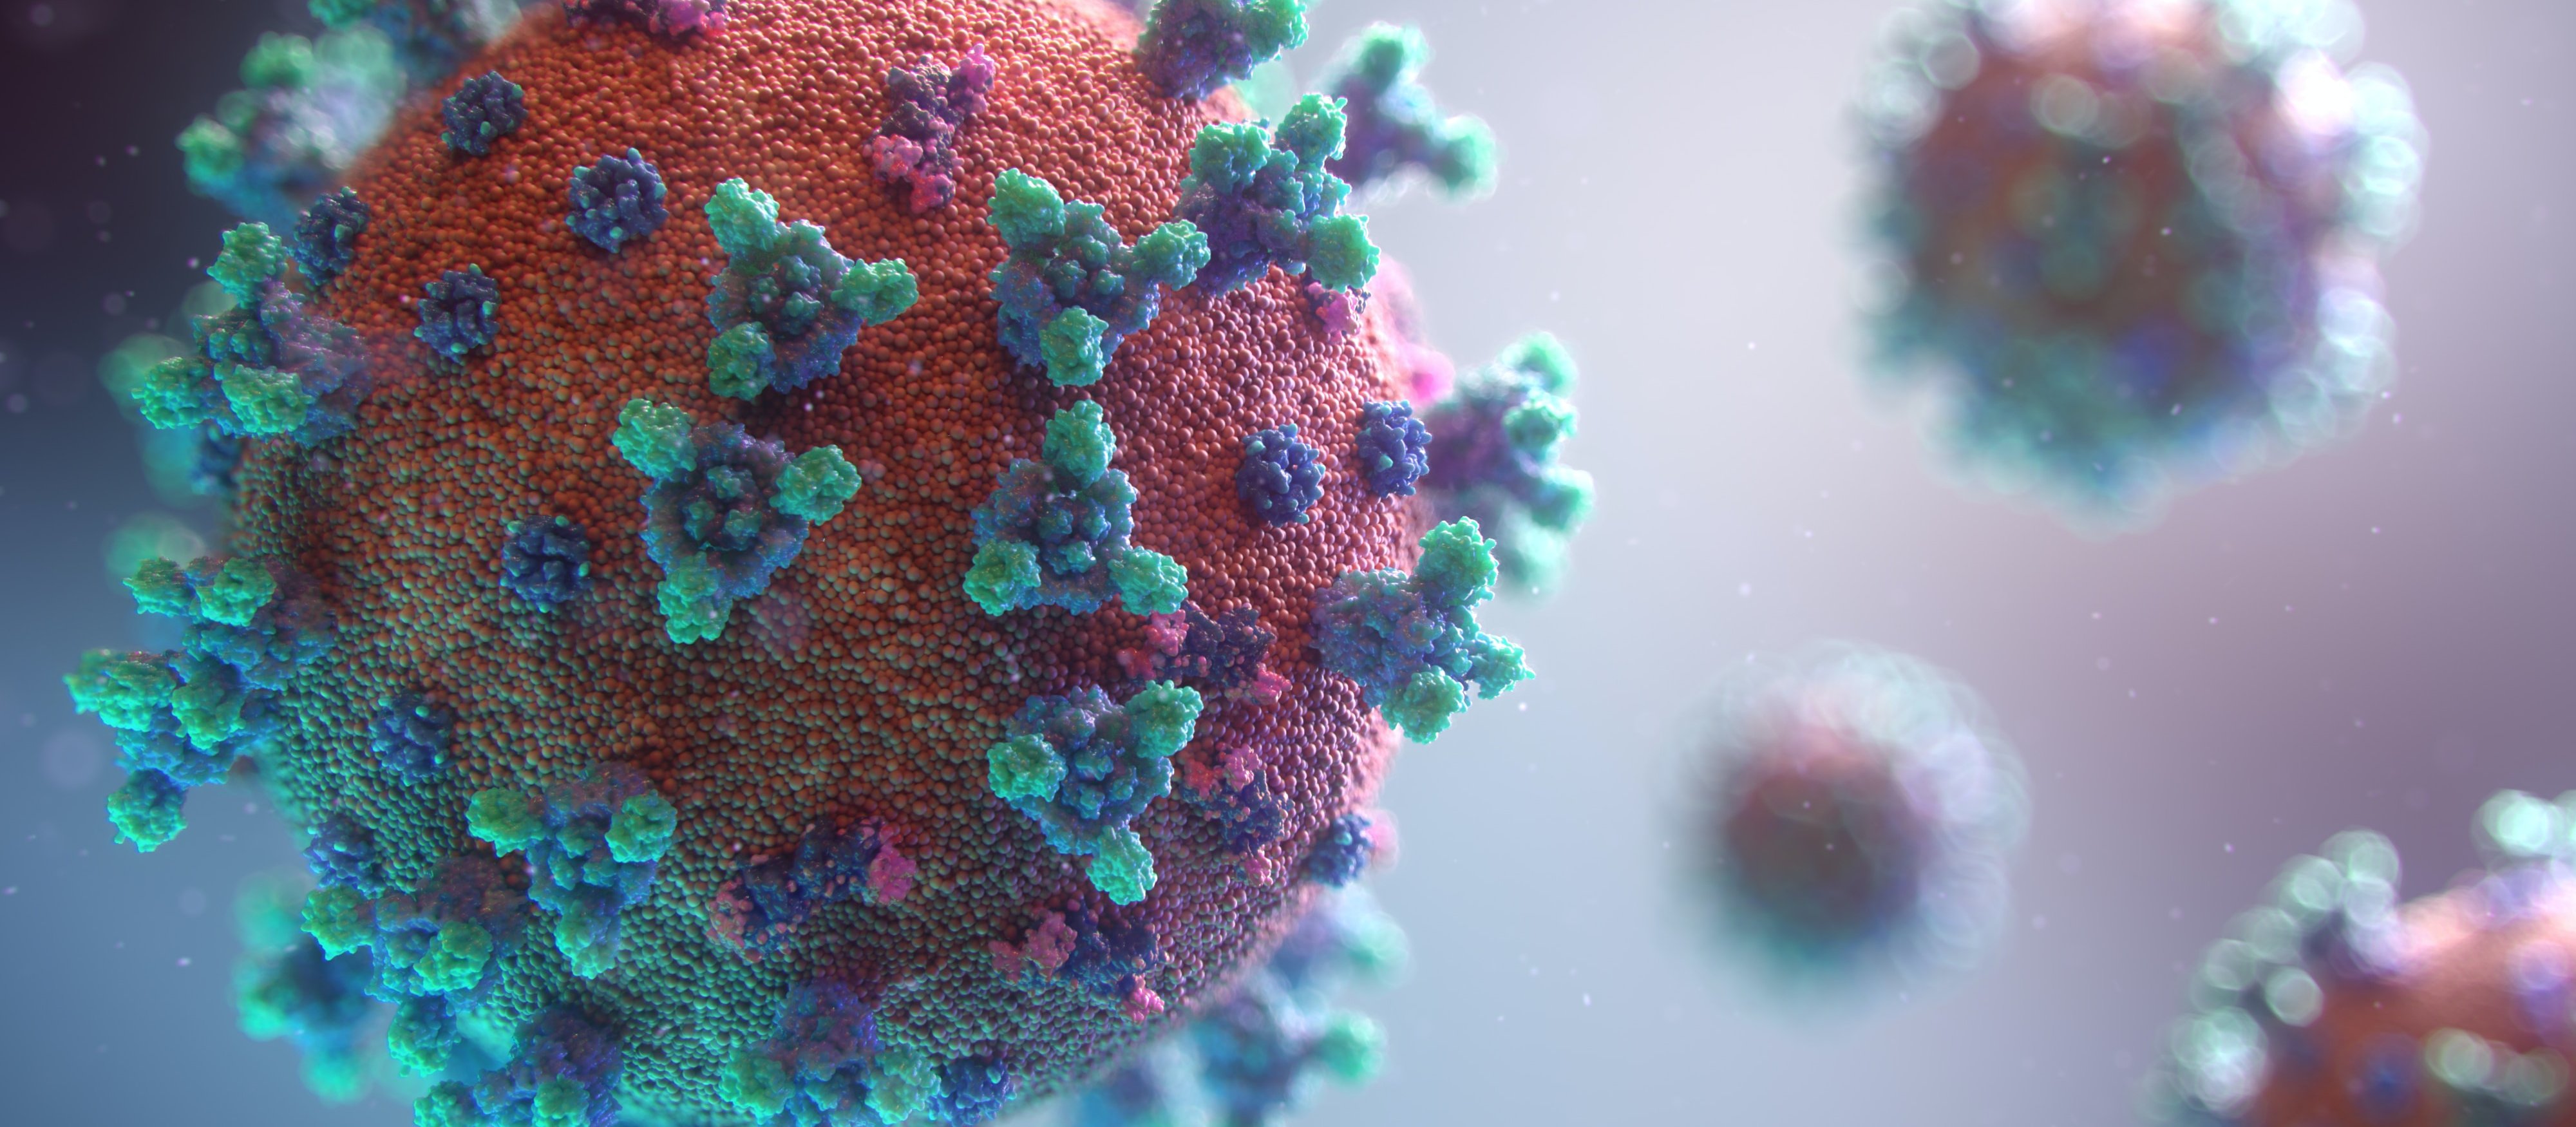 close up image of covid virus particle